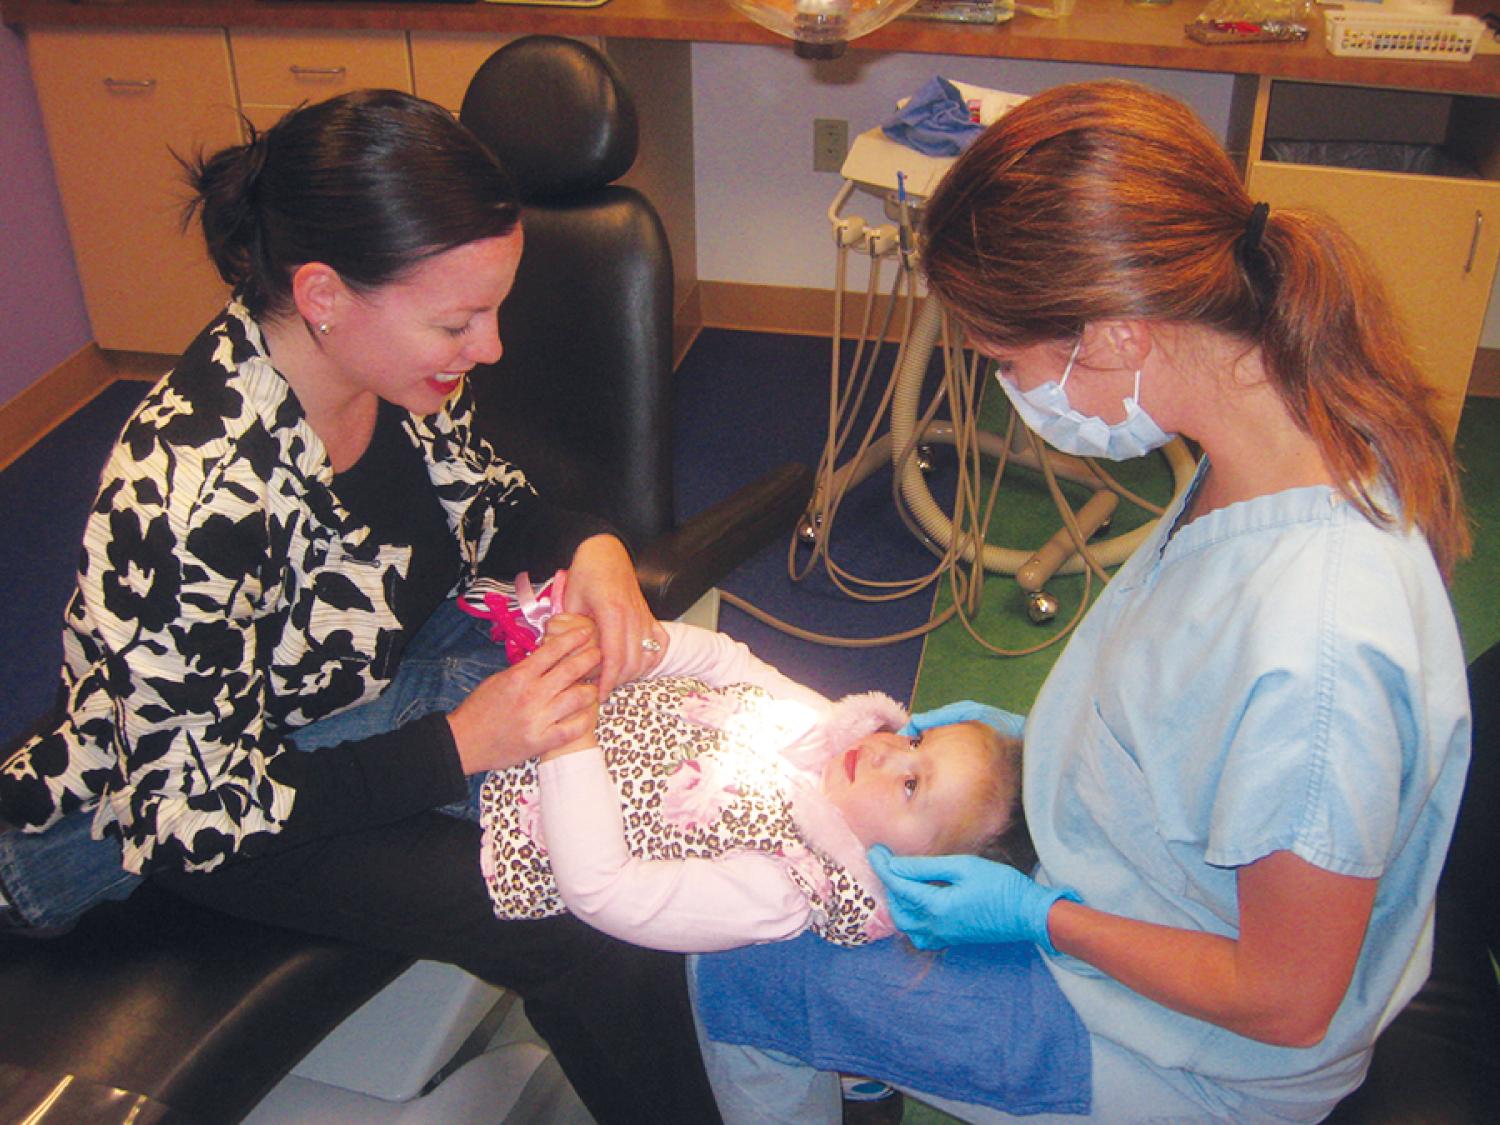 Fig. 21.1, Oral examination of a toddler. A lap examination is a useful way to examine a young or anxious child. The patient is able to hold the parent’s hand and see the parent during the examination.